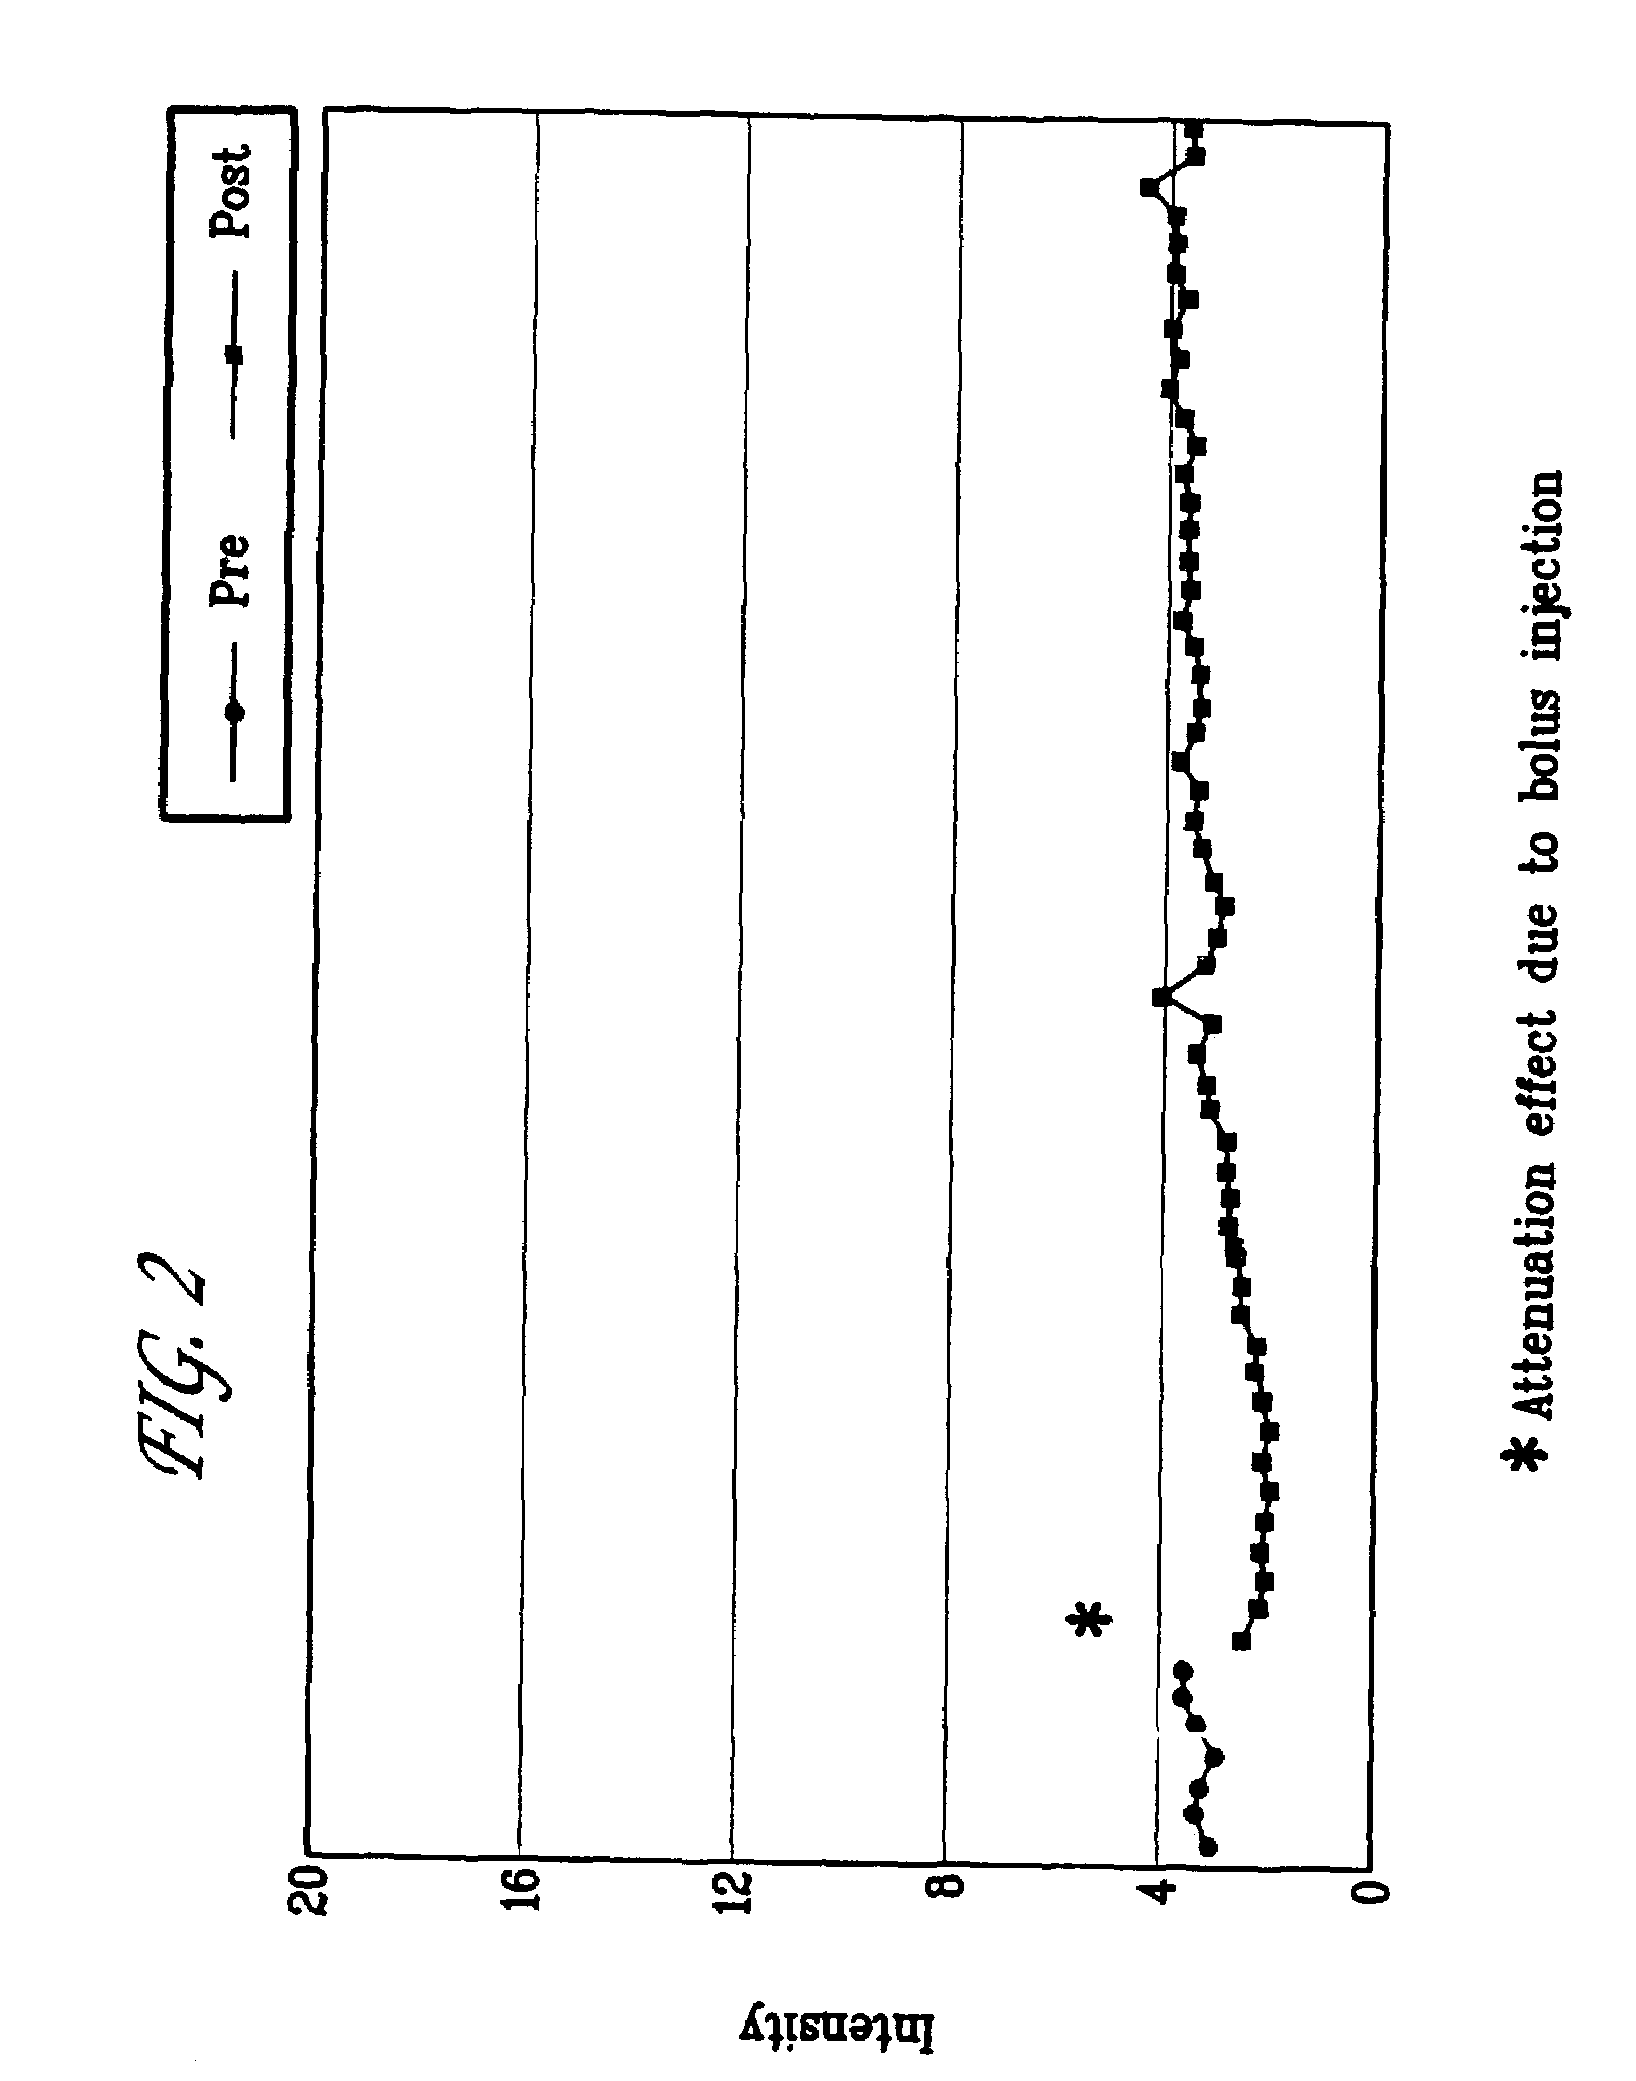 Methods of imaging and treatment